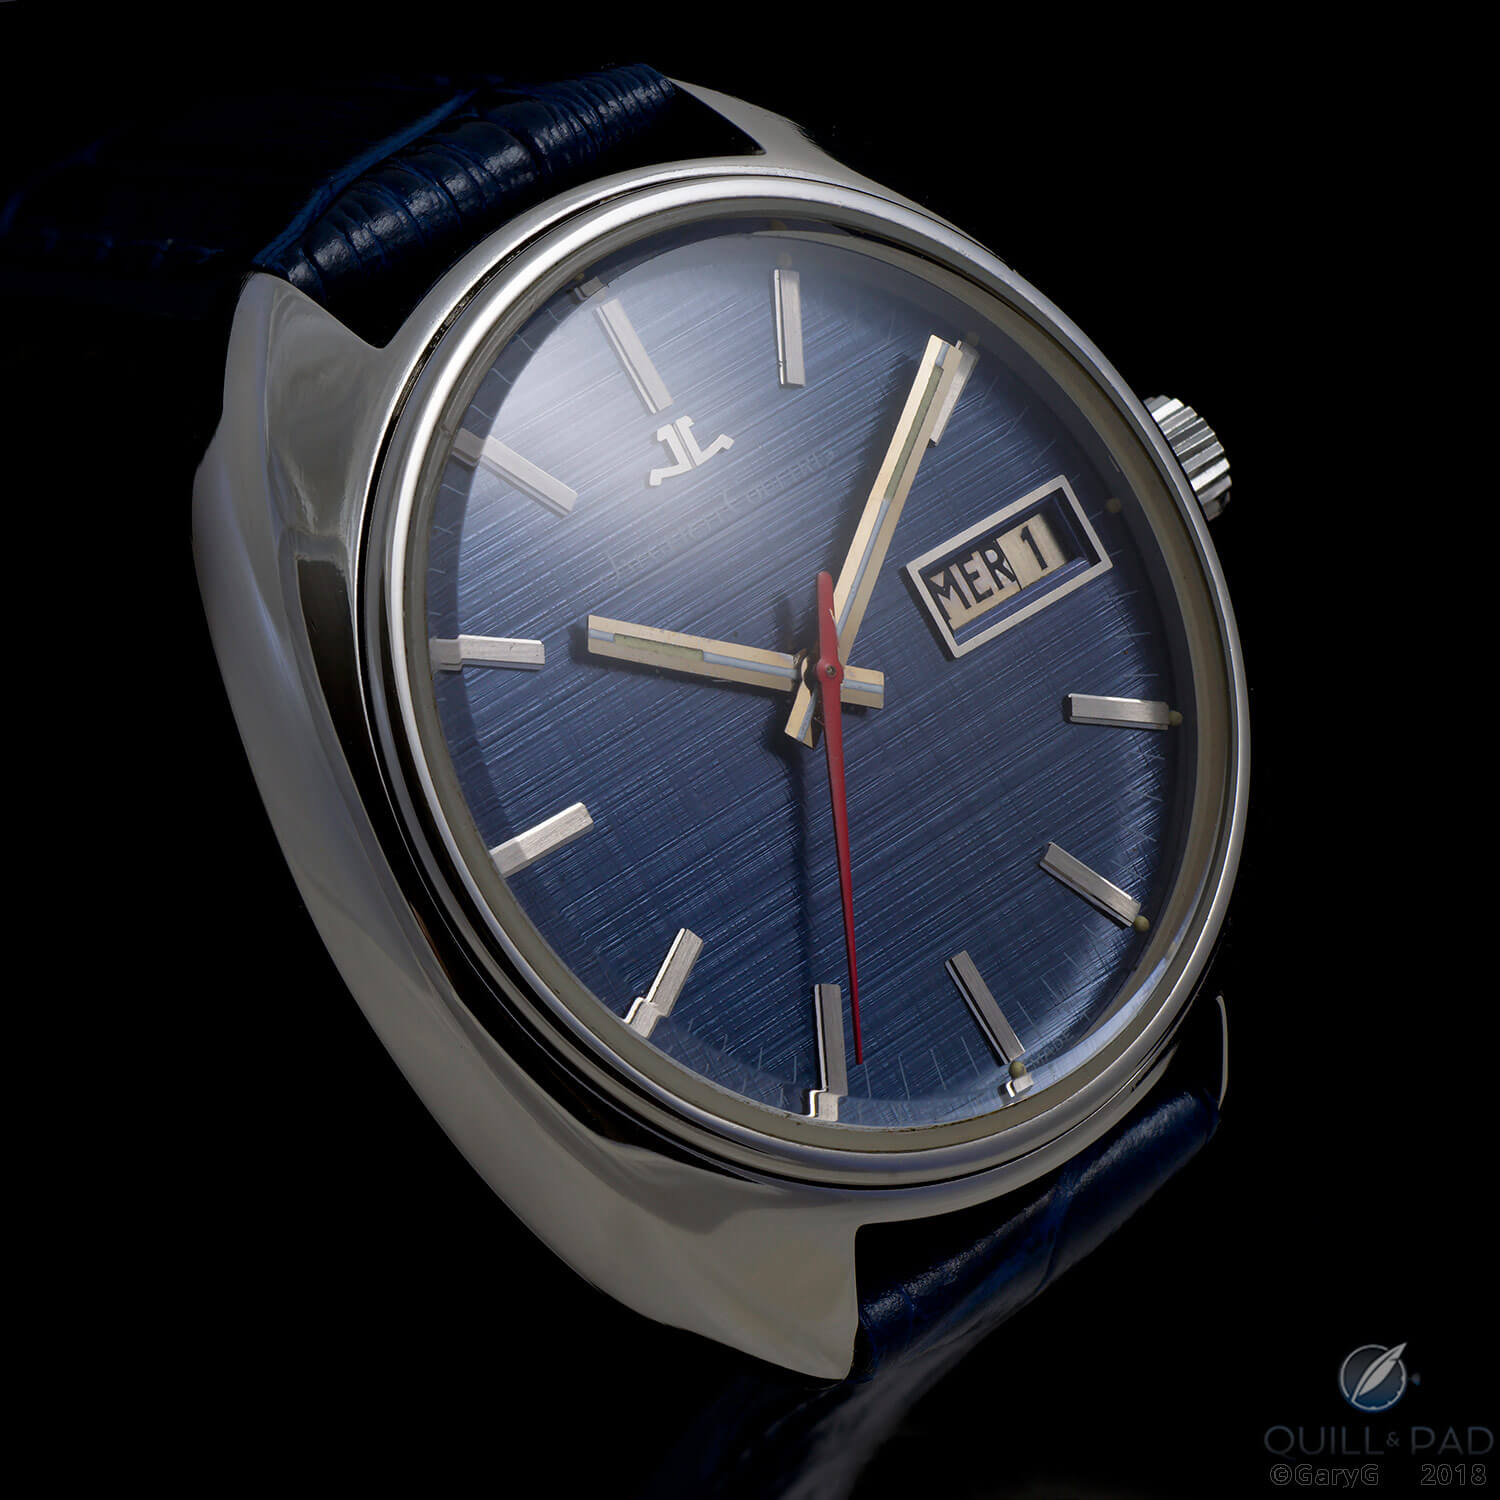 Parting shot: Jaeger-LeCoultre Caliber 906 prototype with blue dial